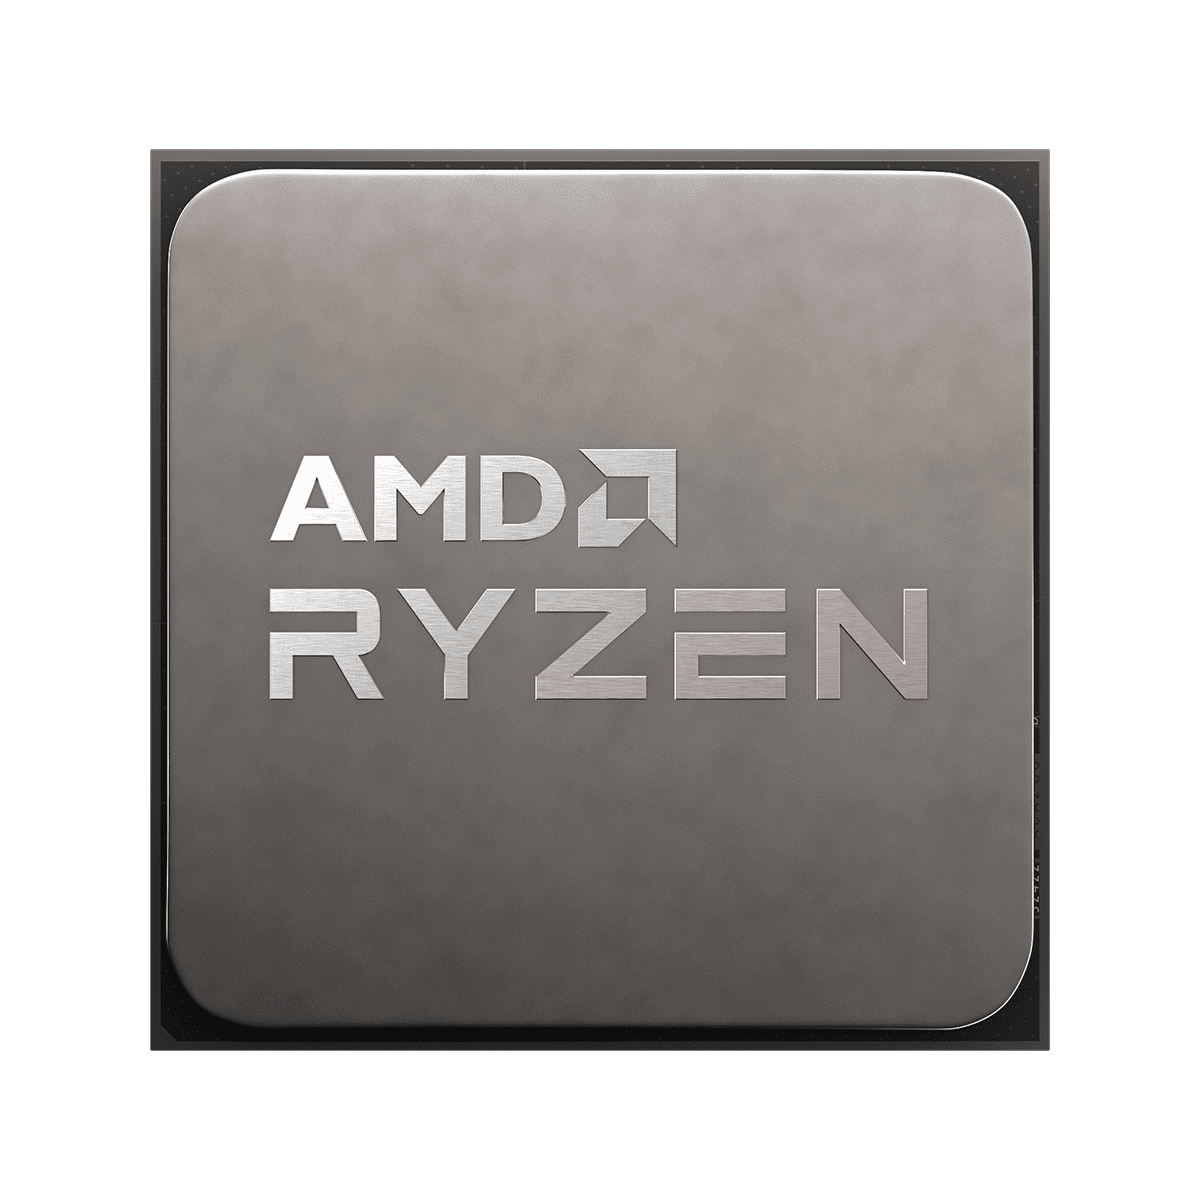 AMD Ryzen 9 5900X without cooler